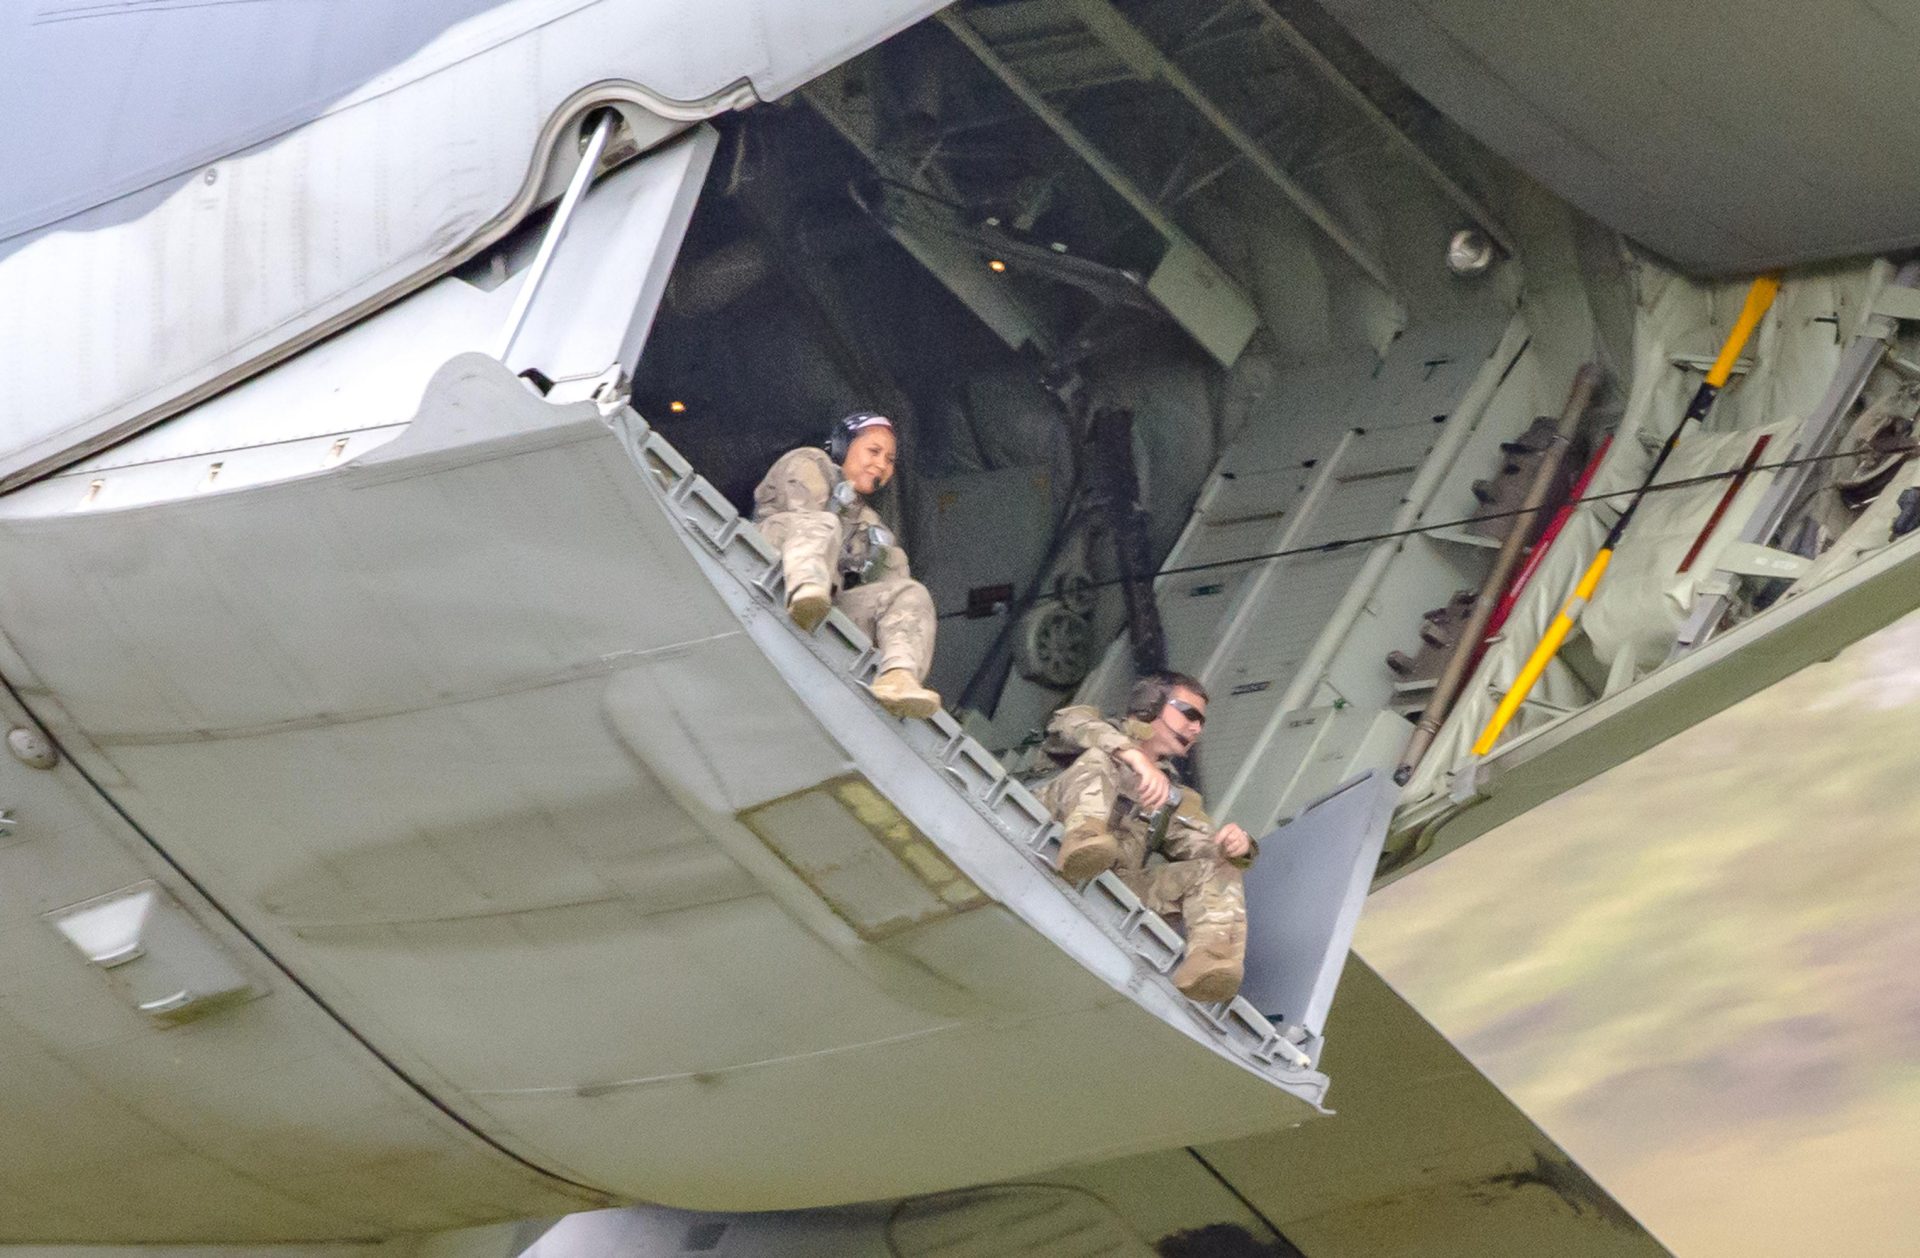 Two US Air Force personnel spotted dangling their legs from the rear exit of their Hercules aircraft as it flies on exercises